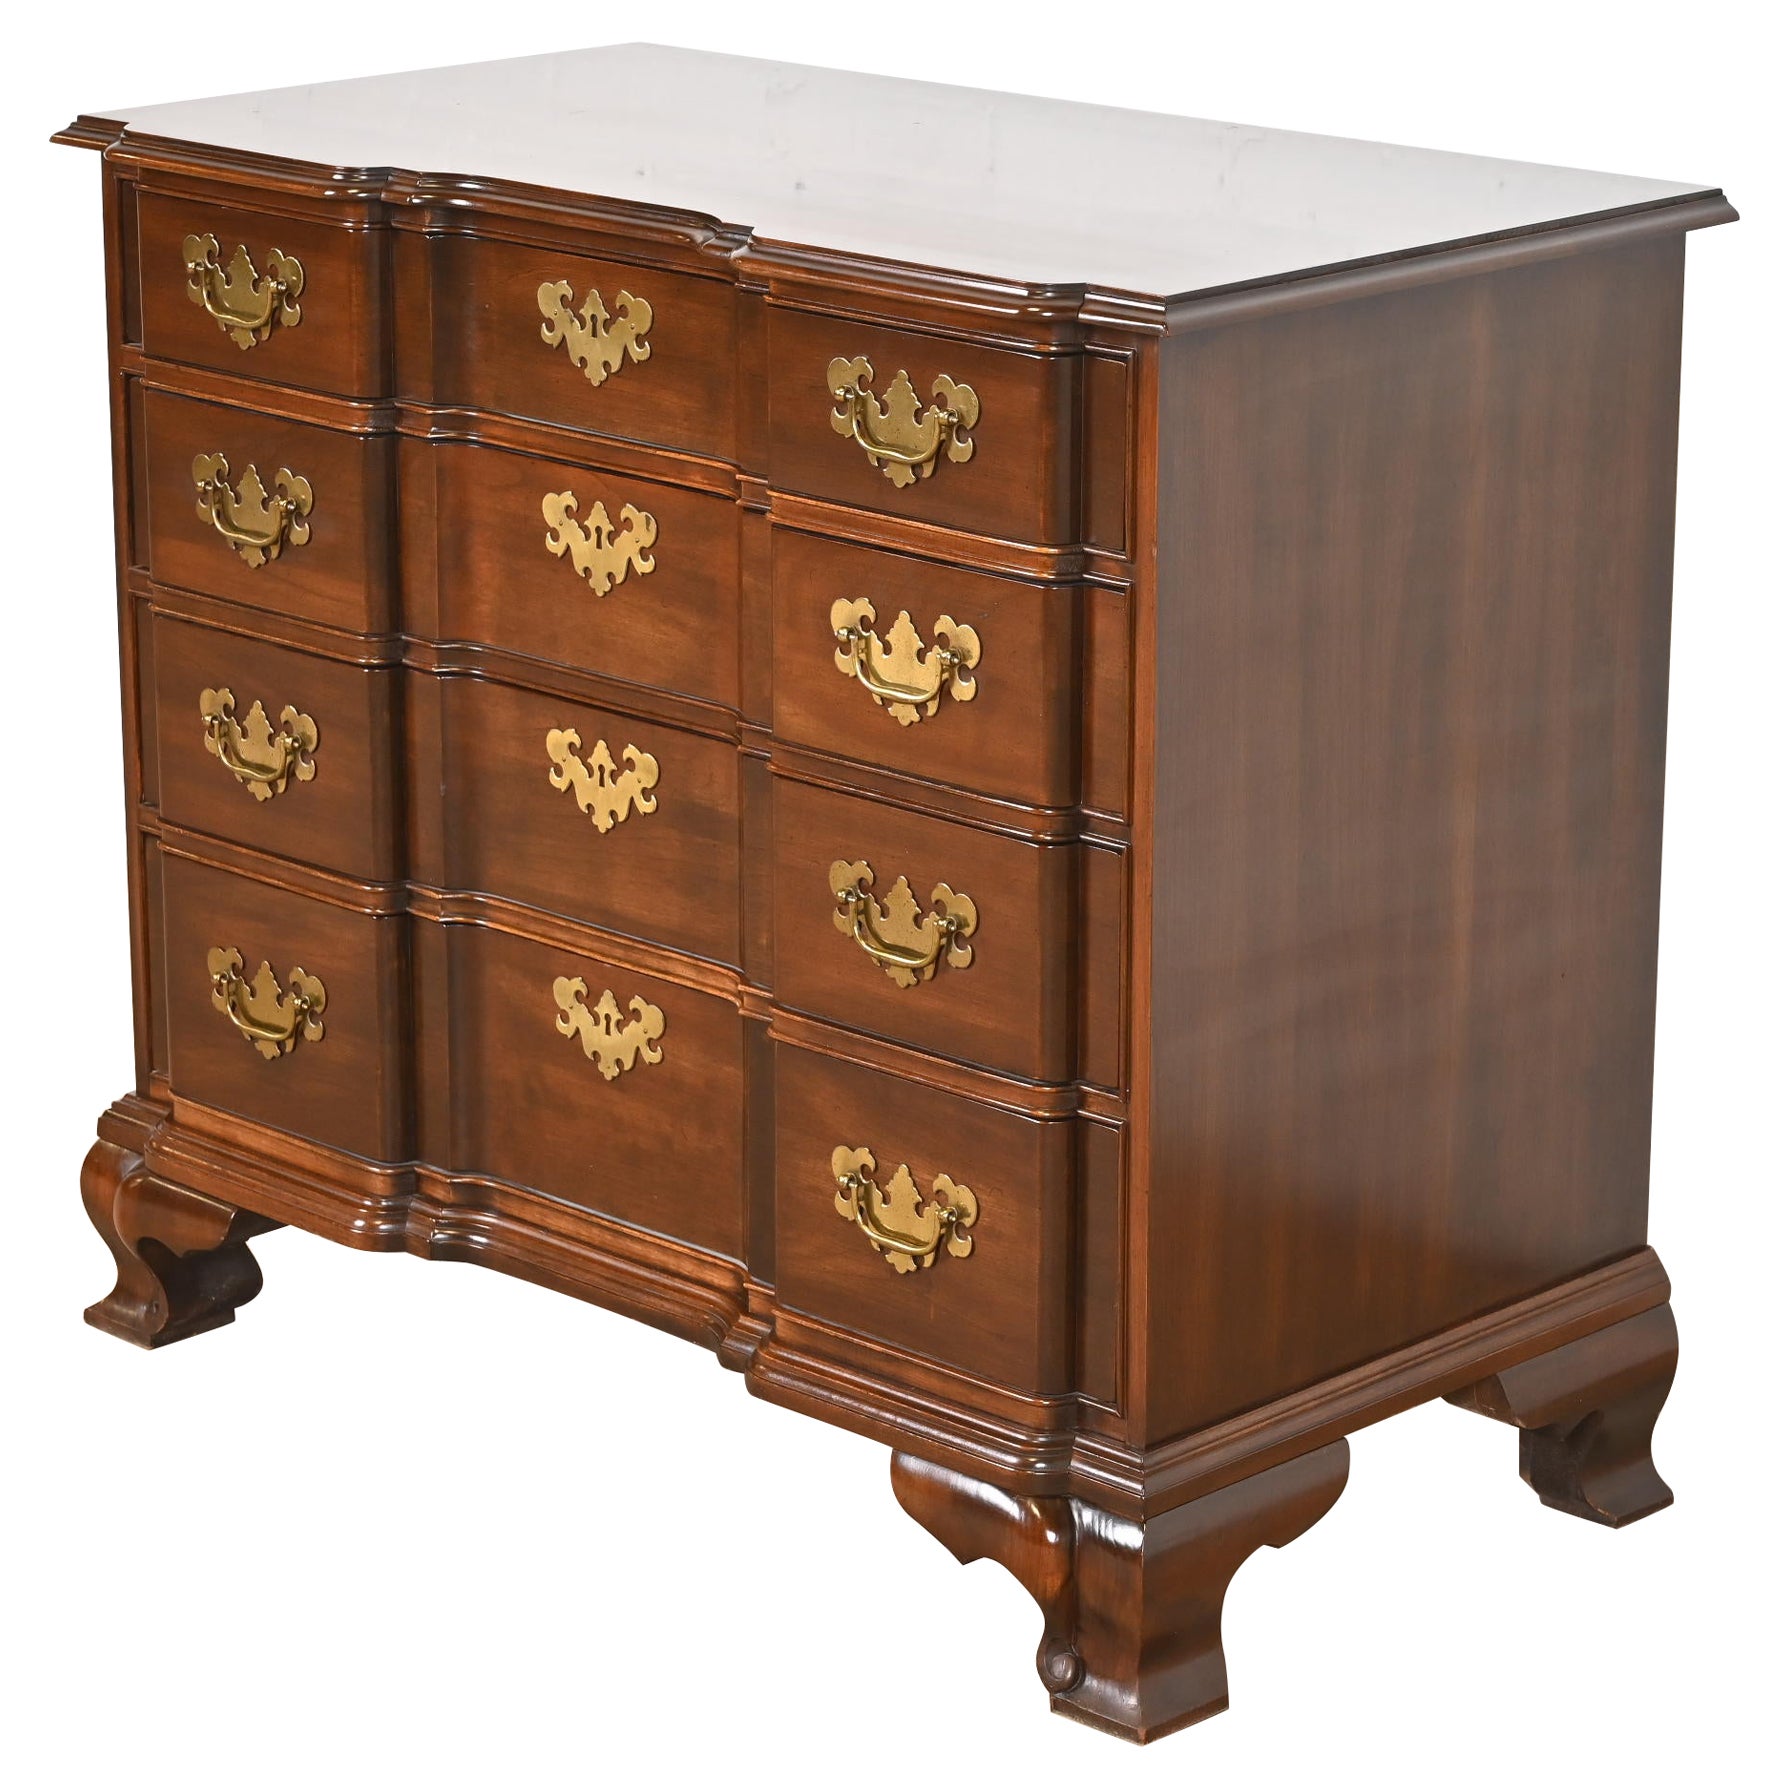 Georgian Solid Cherry Wood Block Front Chest of Drawers For Sale